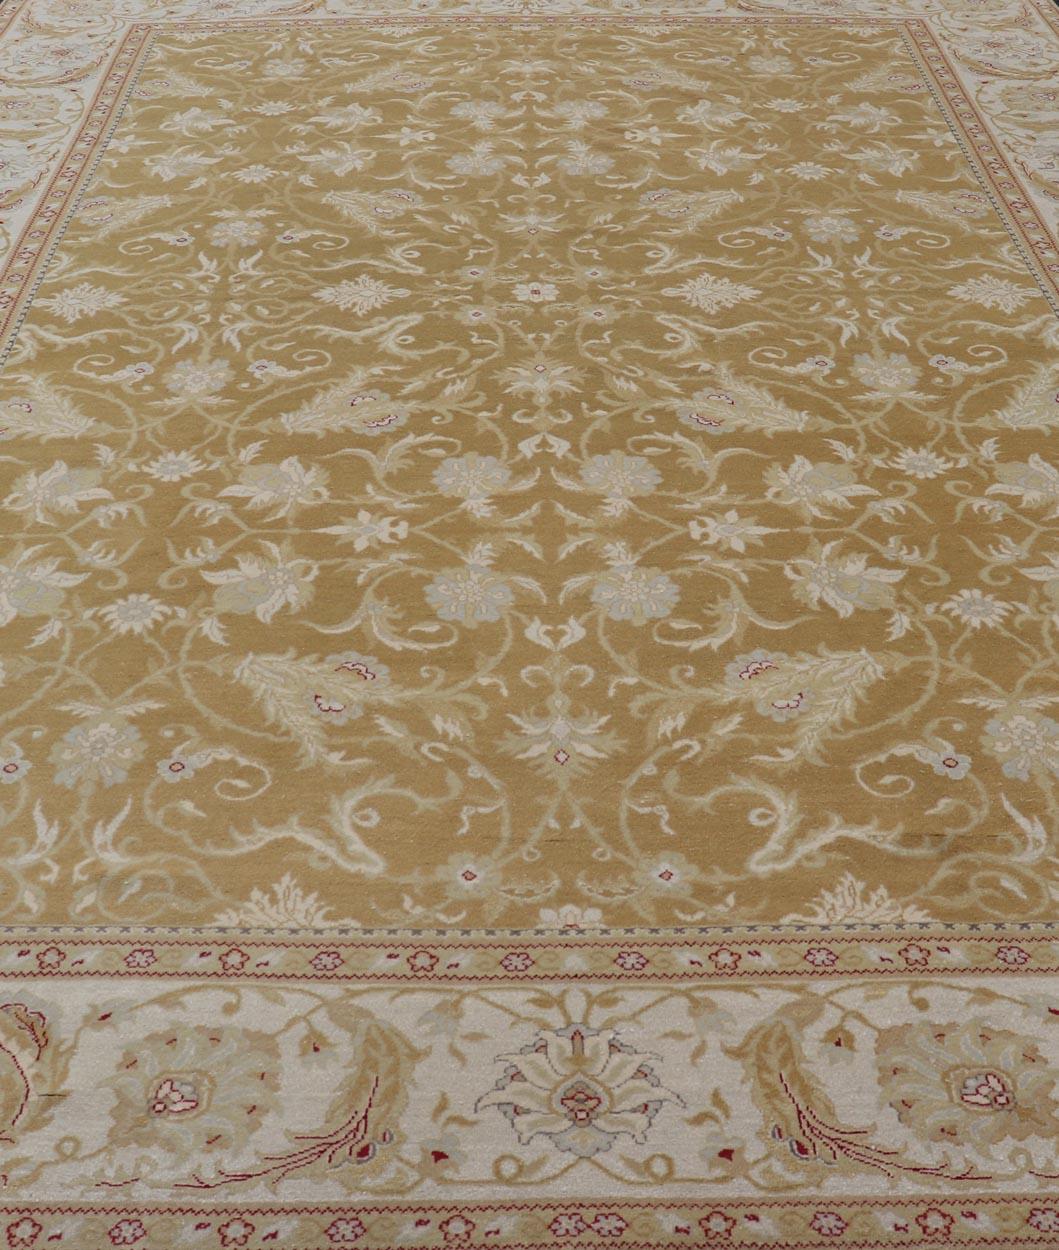 Vintage Indian Amritsar Rug with All-Over Floral Design In Good Condition For Sale In Atlanta, GA